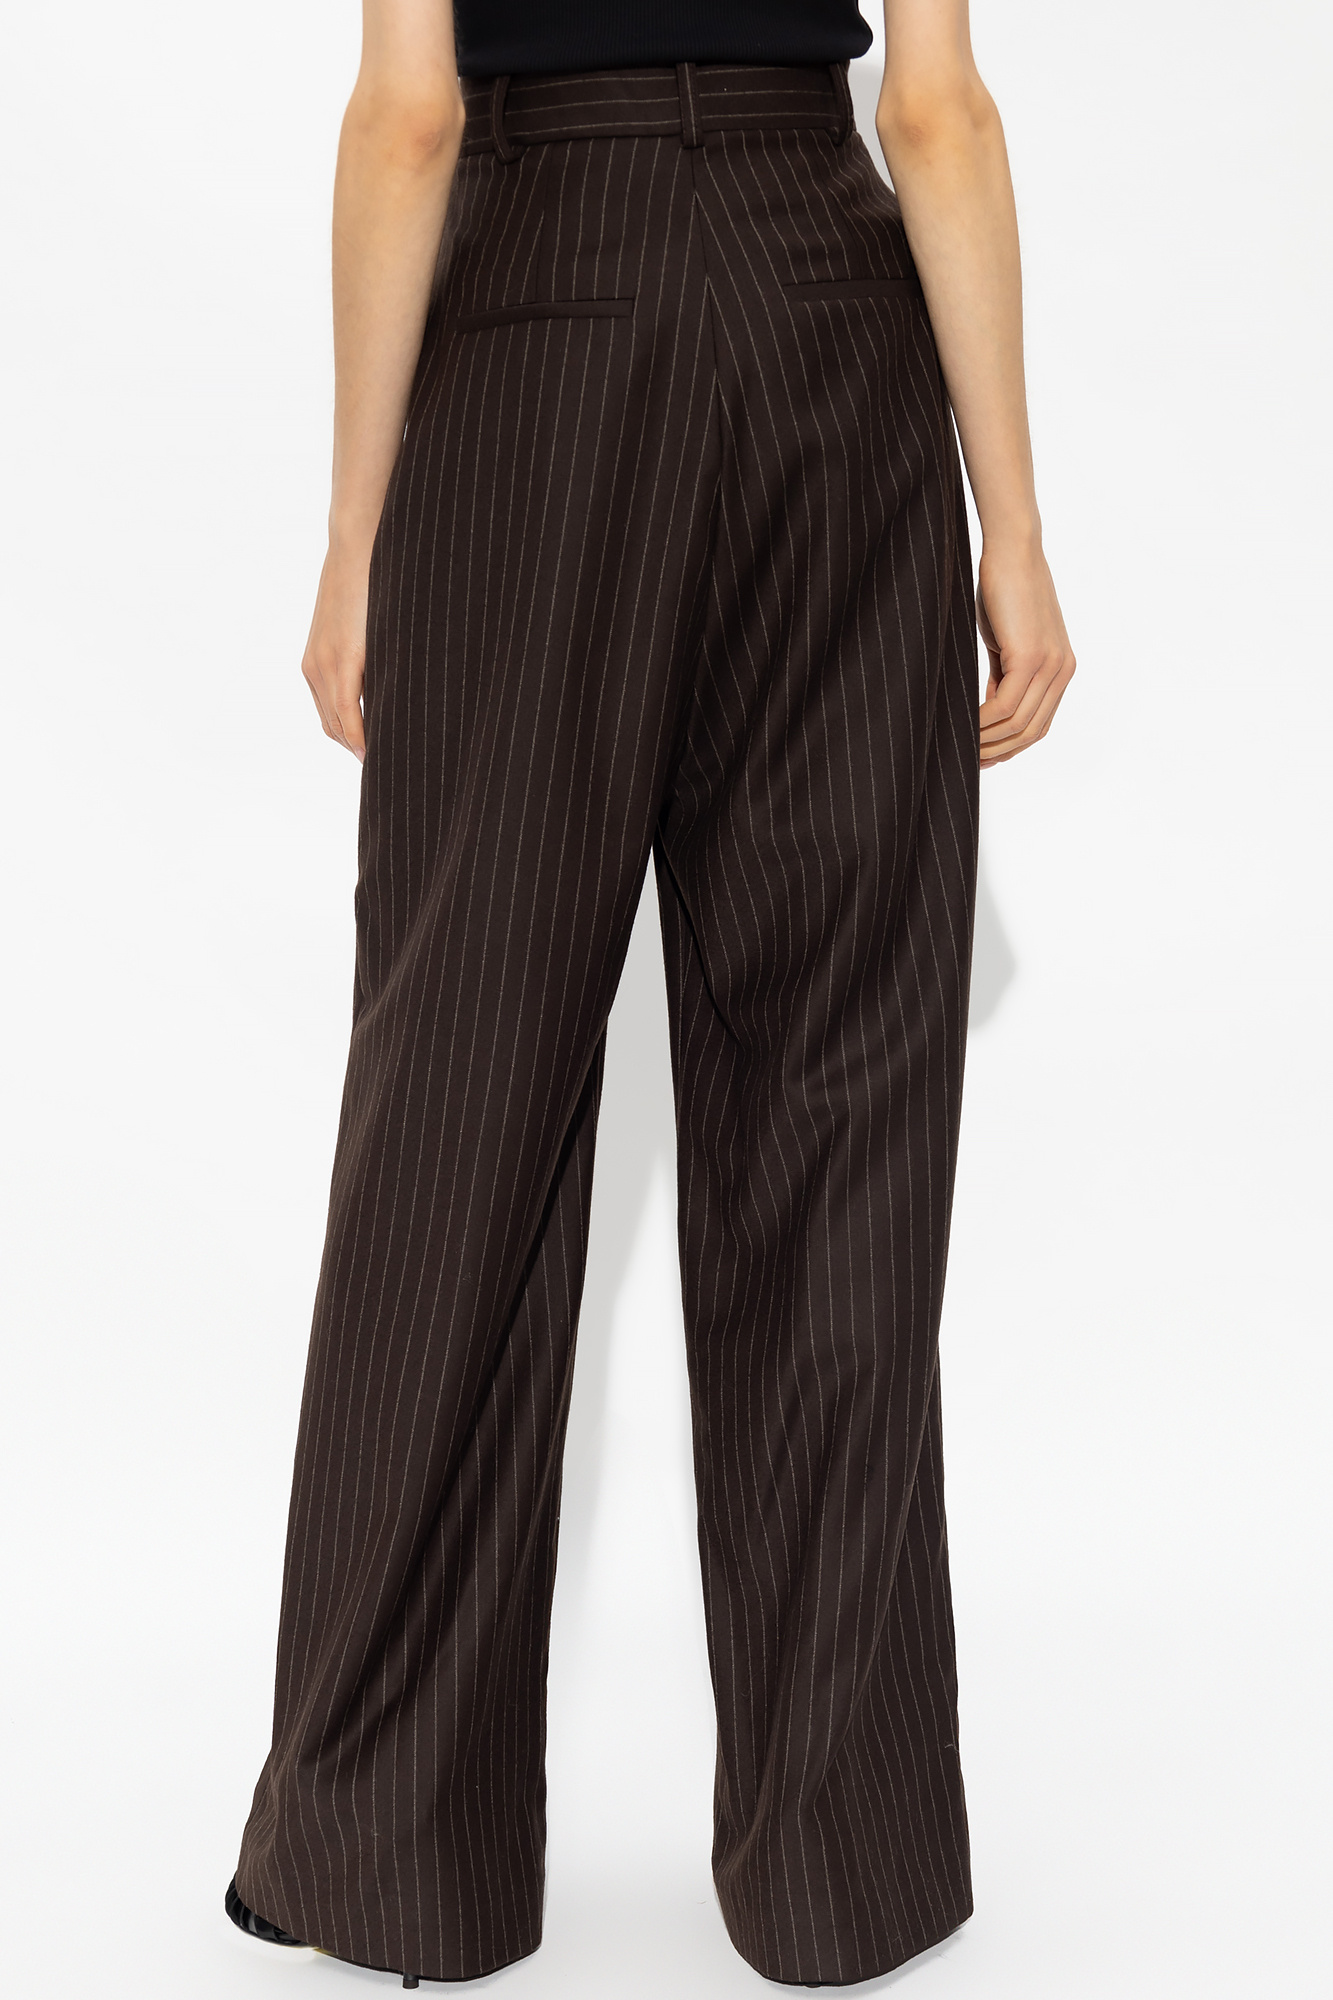 The Mannei ‘Jafr’ pleat-front trousers